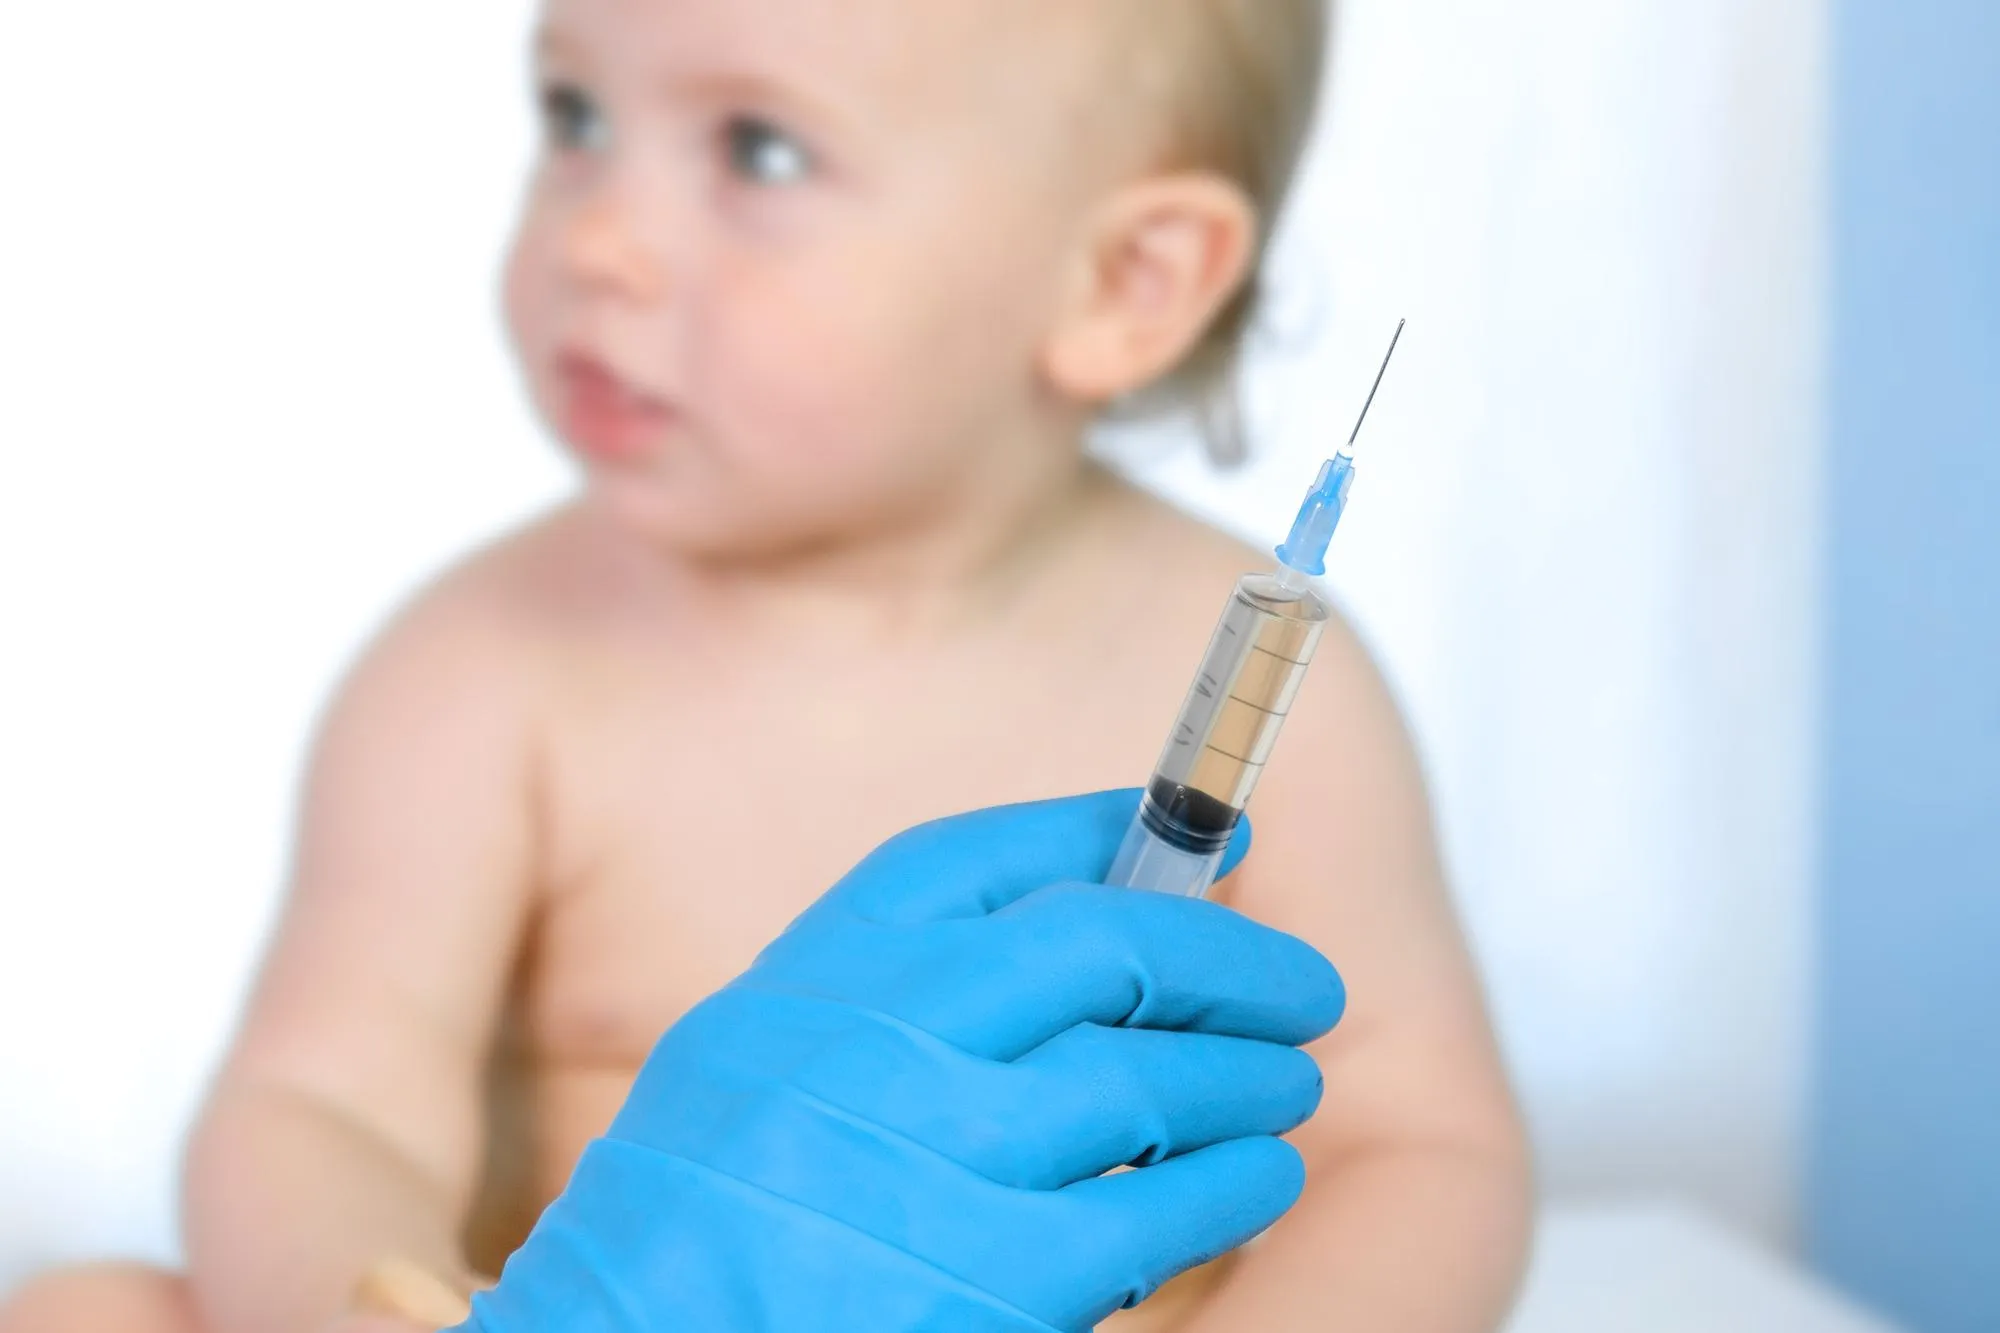 Parents Connecting Vaccines to Child’s Developmental Delays: The Importance of Informed Choice